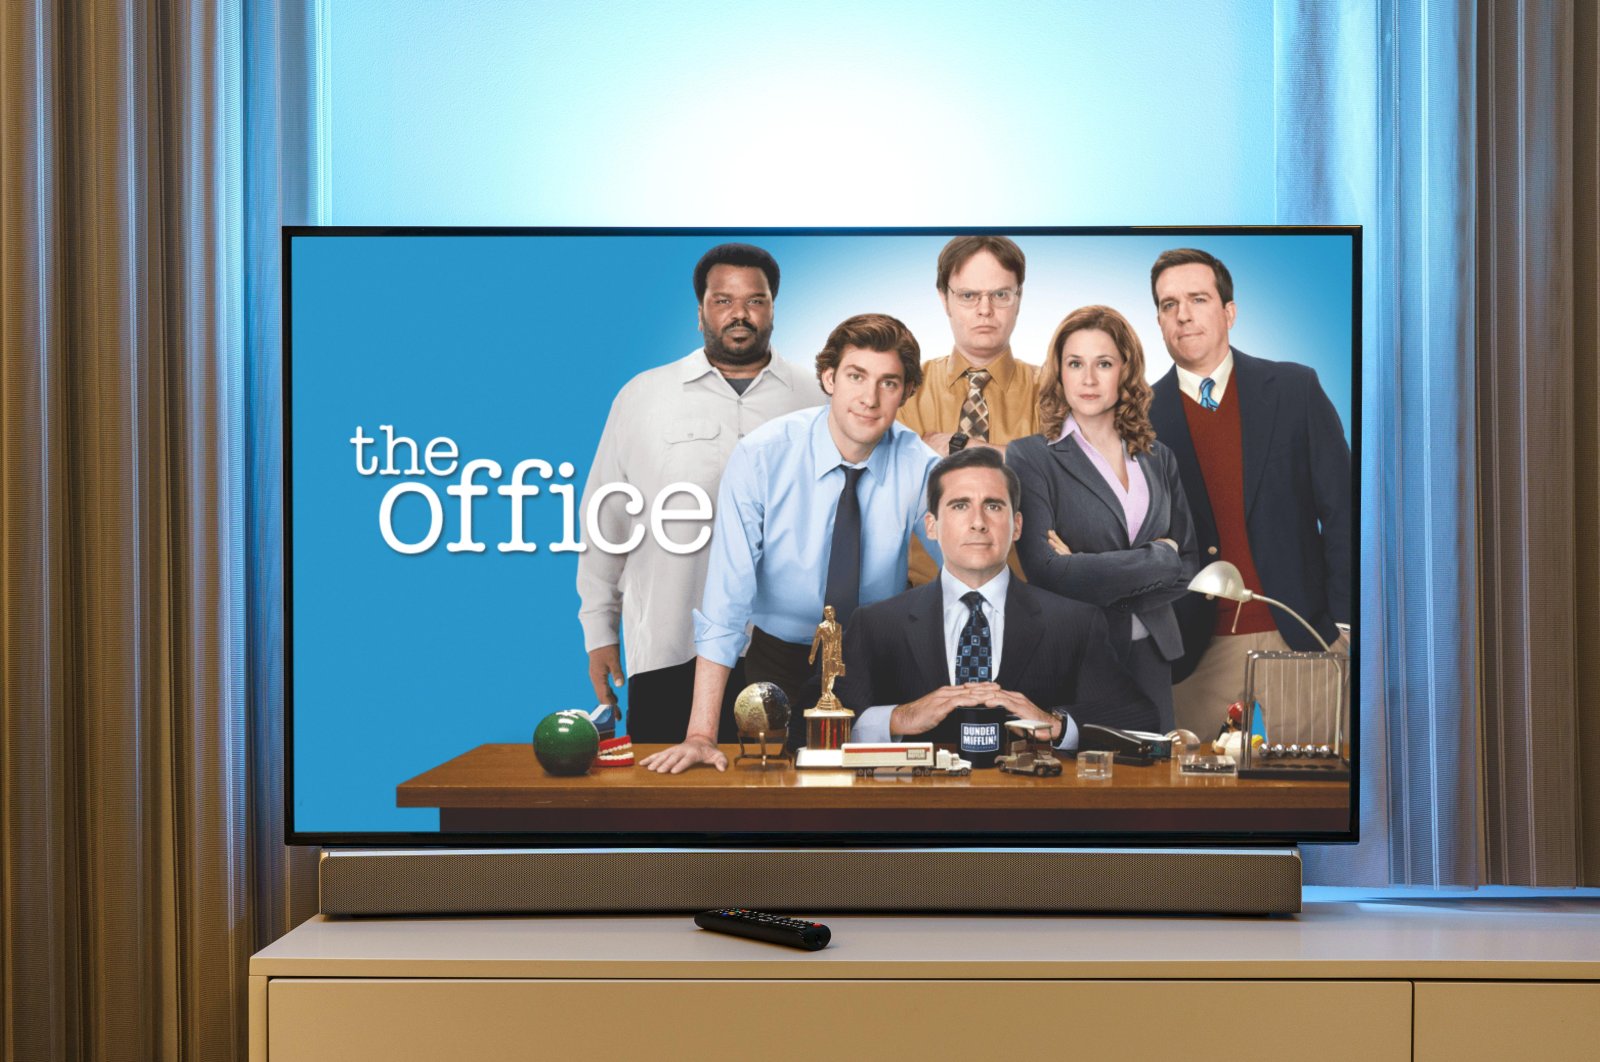 Several members of the cast from the popular American TV series "The Office" appear on a TV screen in this undated photo. (Alamy via Reuters)